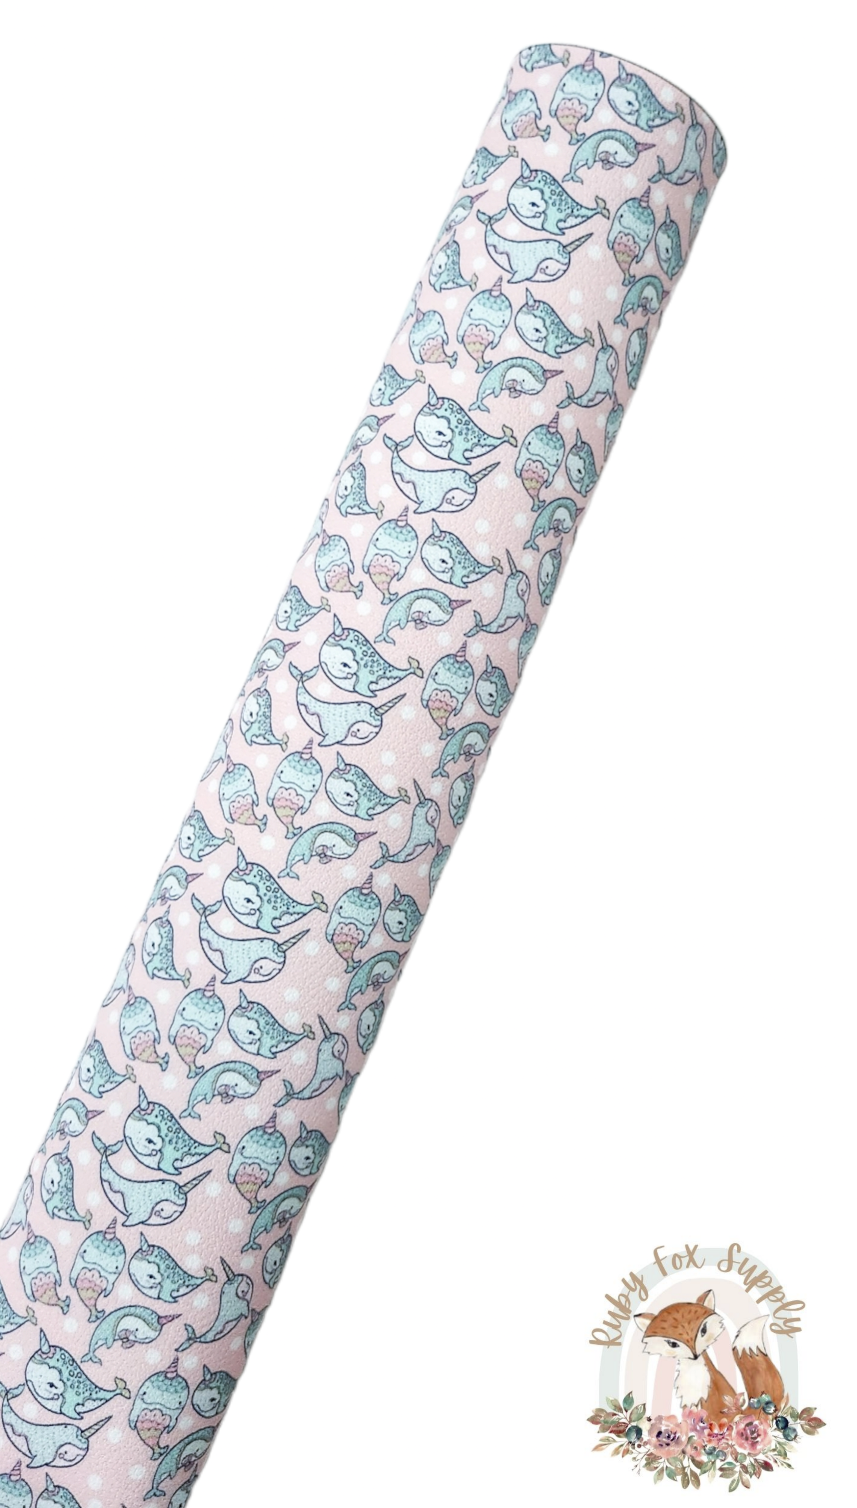 Drawn Narwhal 9x12 faux leather sheet